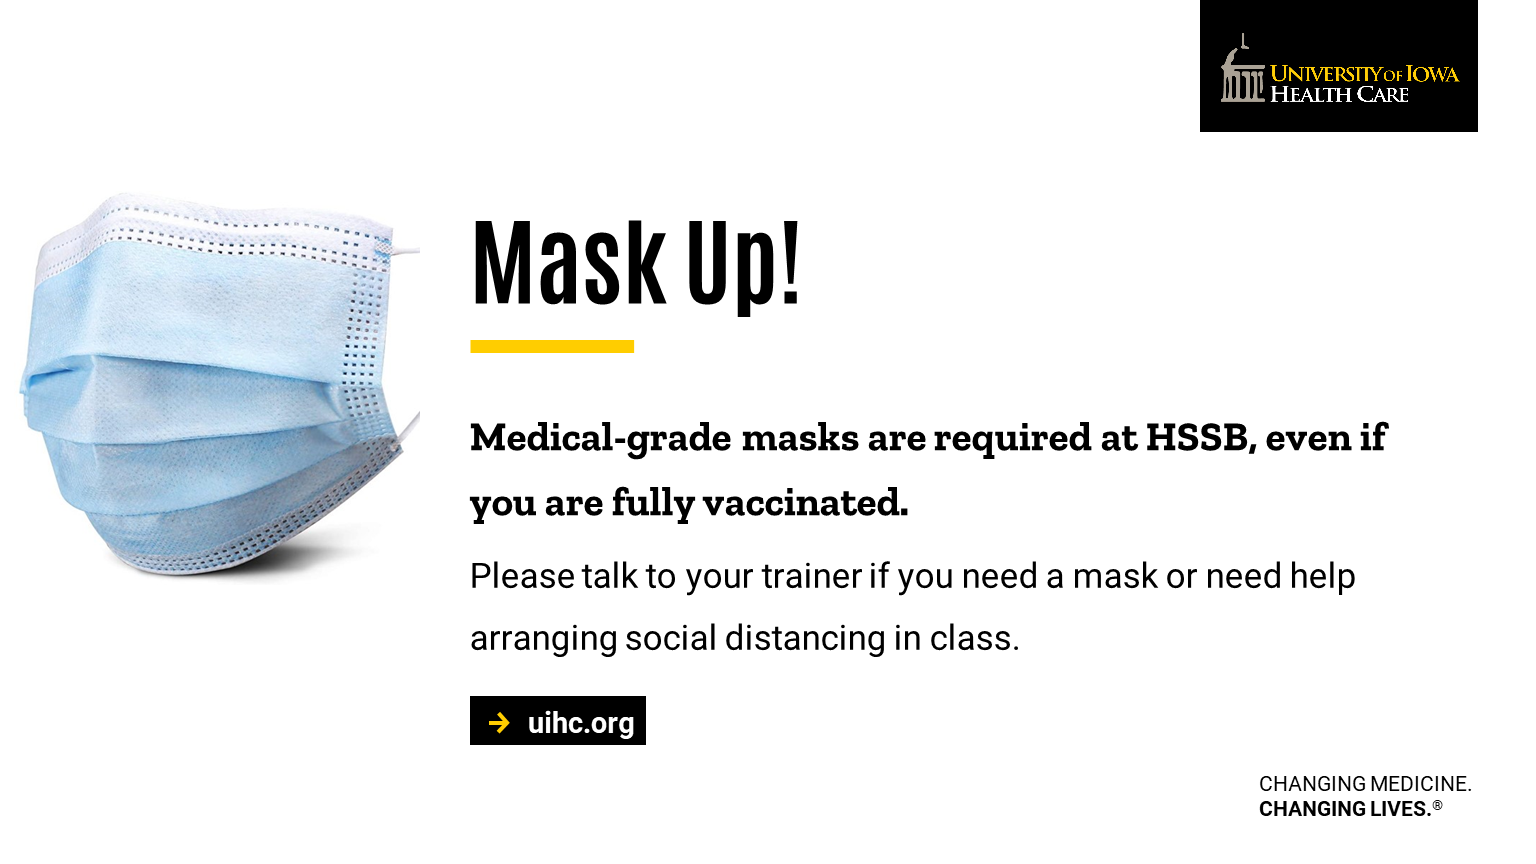 Masks are required at HSSB regardless of vaccination status.